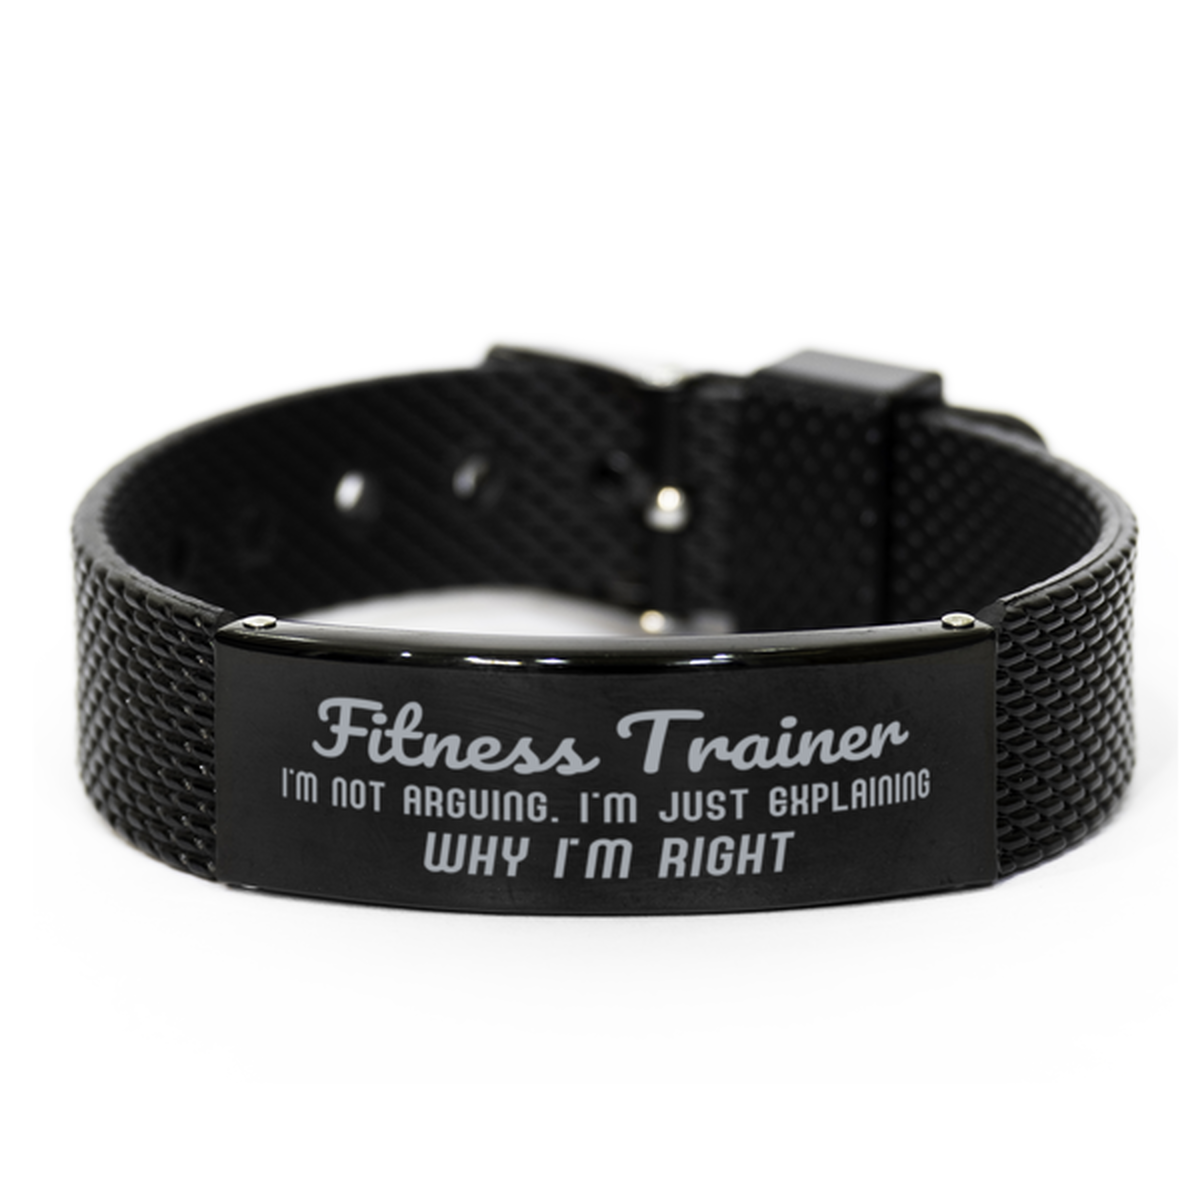 Fitness Trainer I'm not Arguing. I'm Just Explaining Why I'm RIGHT Black Shark Mesh Bracelet, Funny Saying Quote Fitness Trainer Gifts For Fitness Trainer Graduation Birthday Christmas Gifts for Men Women Coworker